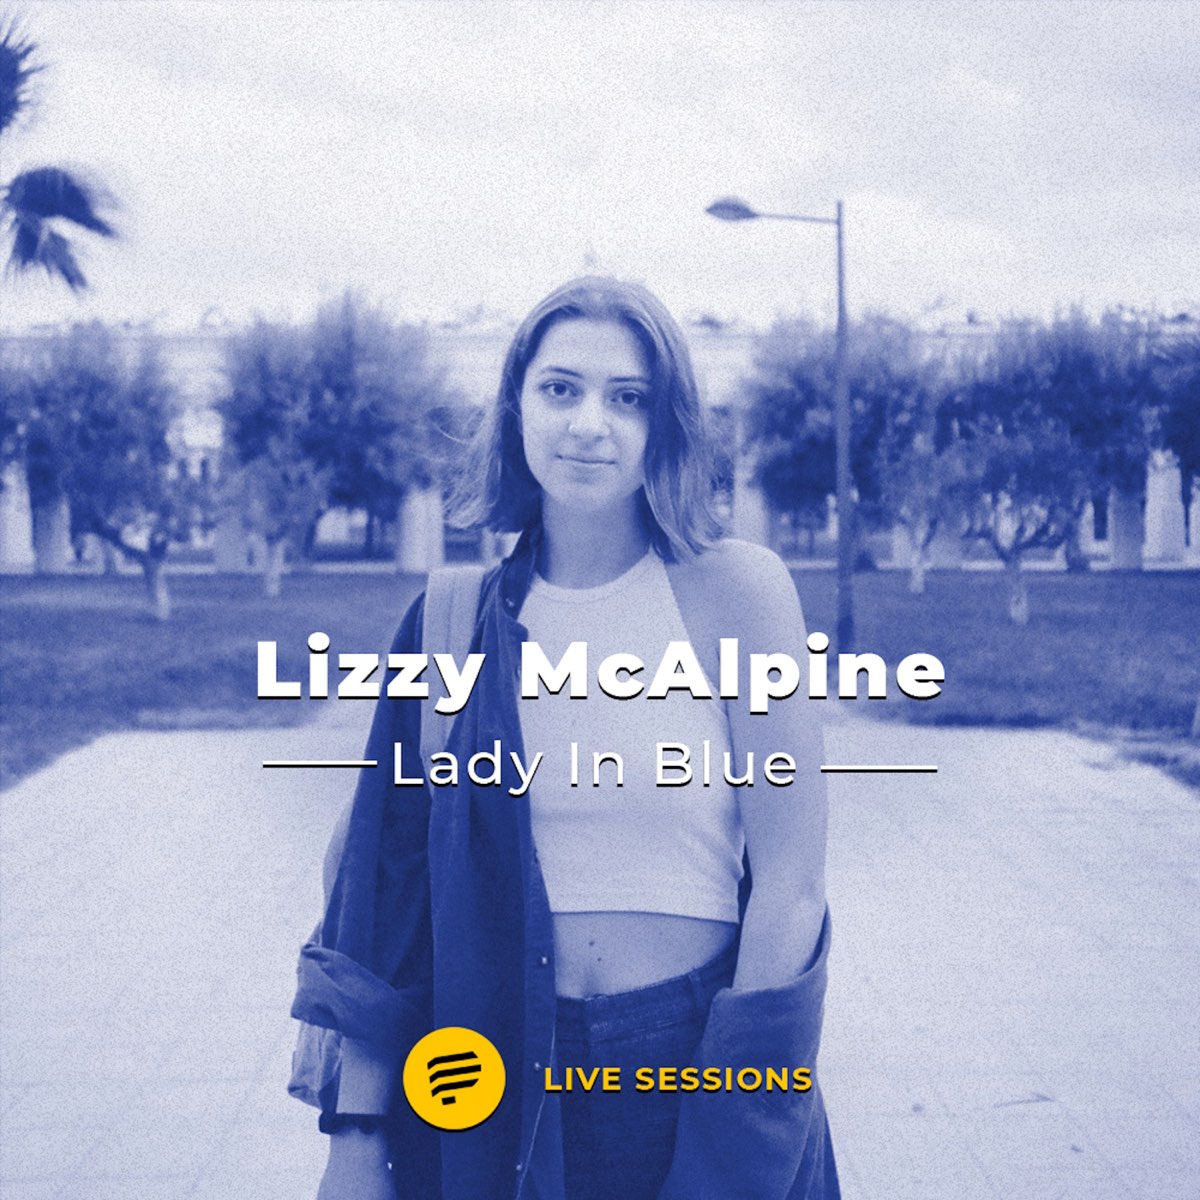 Lizzy McAlpine - Lady in Blue (Pickup Live Session)